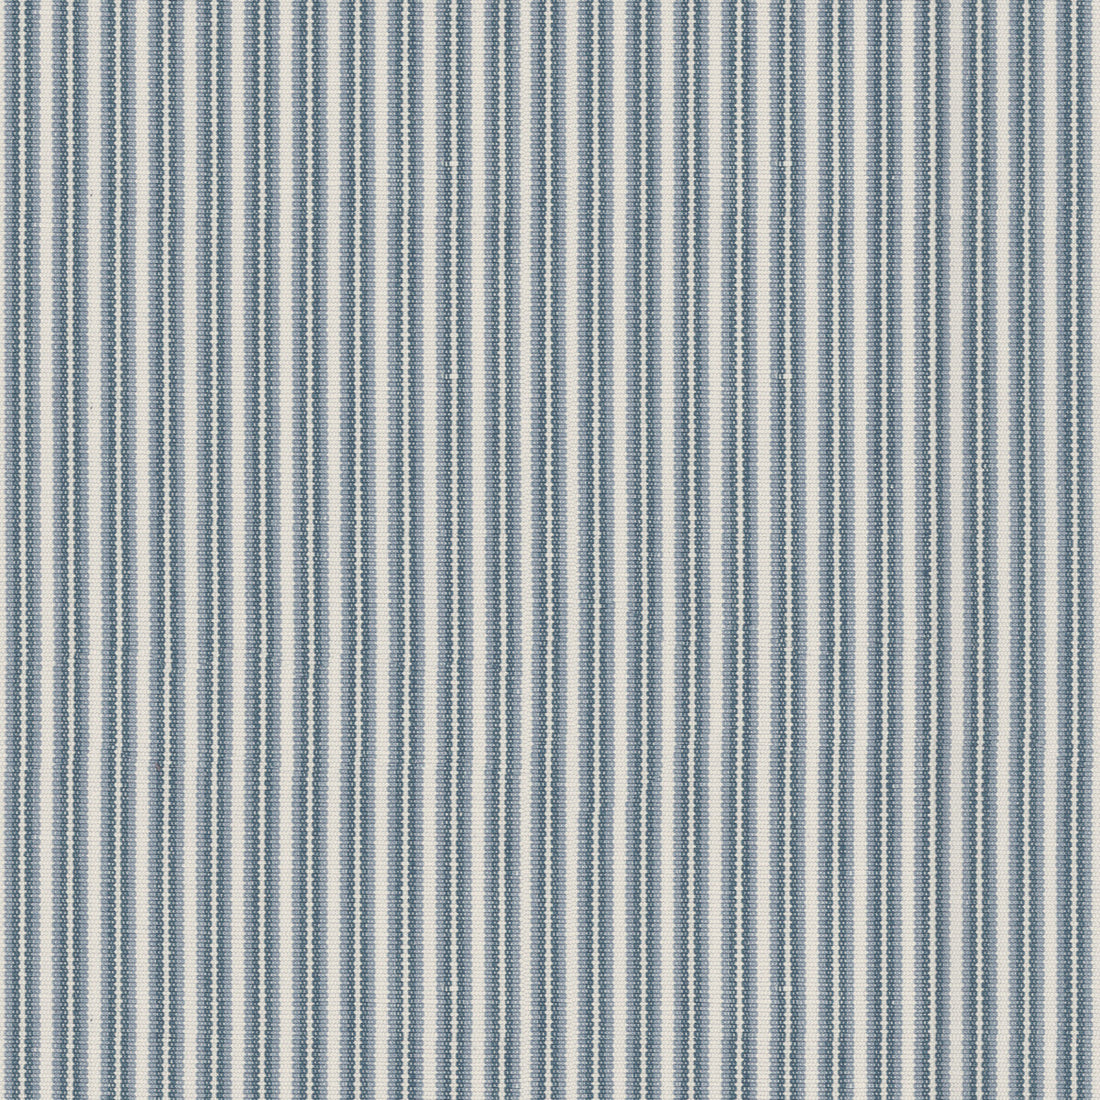 Chamas Stripe fabric in blue color - pattern 8017103.5.0 - by Brunschwig &amp; Fils in the Durance collection